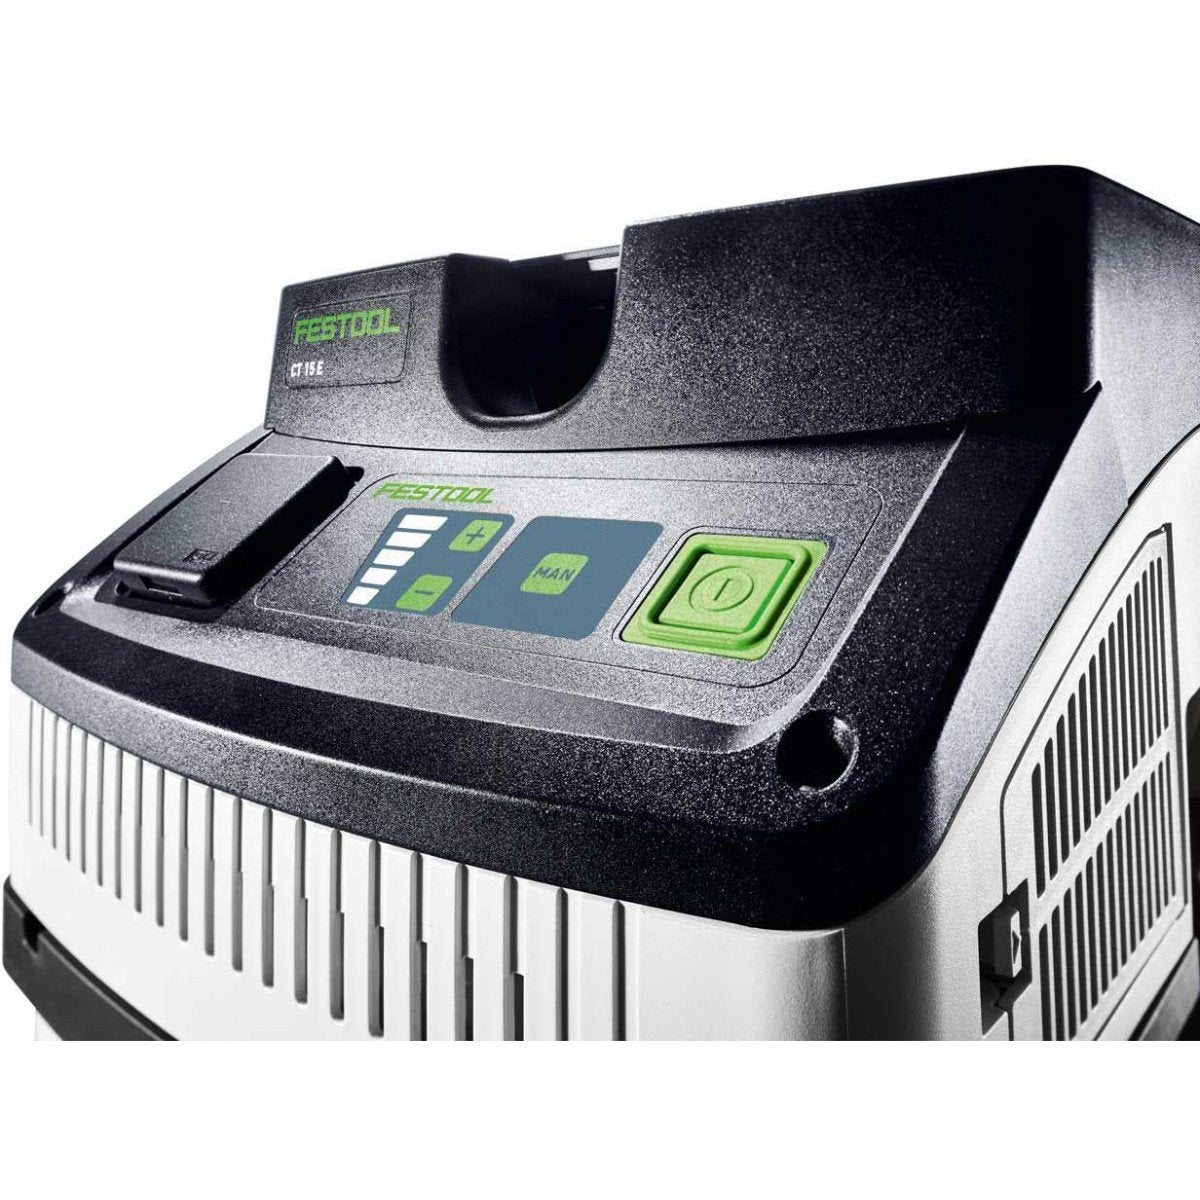 Festool CT 15 HEPA Dust Extractor - Ultimate ToolsPower control switch, manual operation, suction control, and power outlet for tool-started switching are on the front panel.